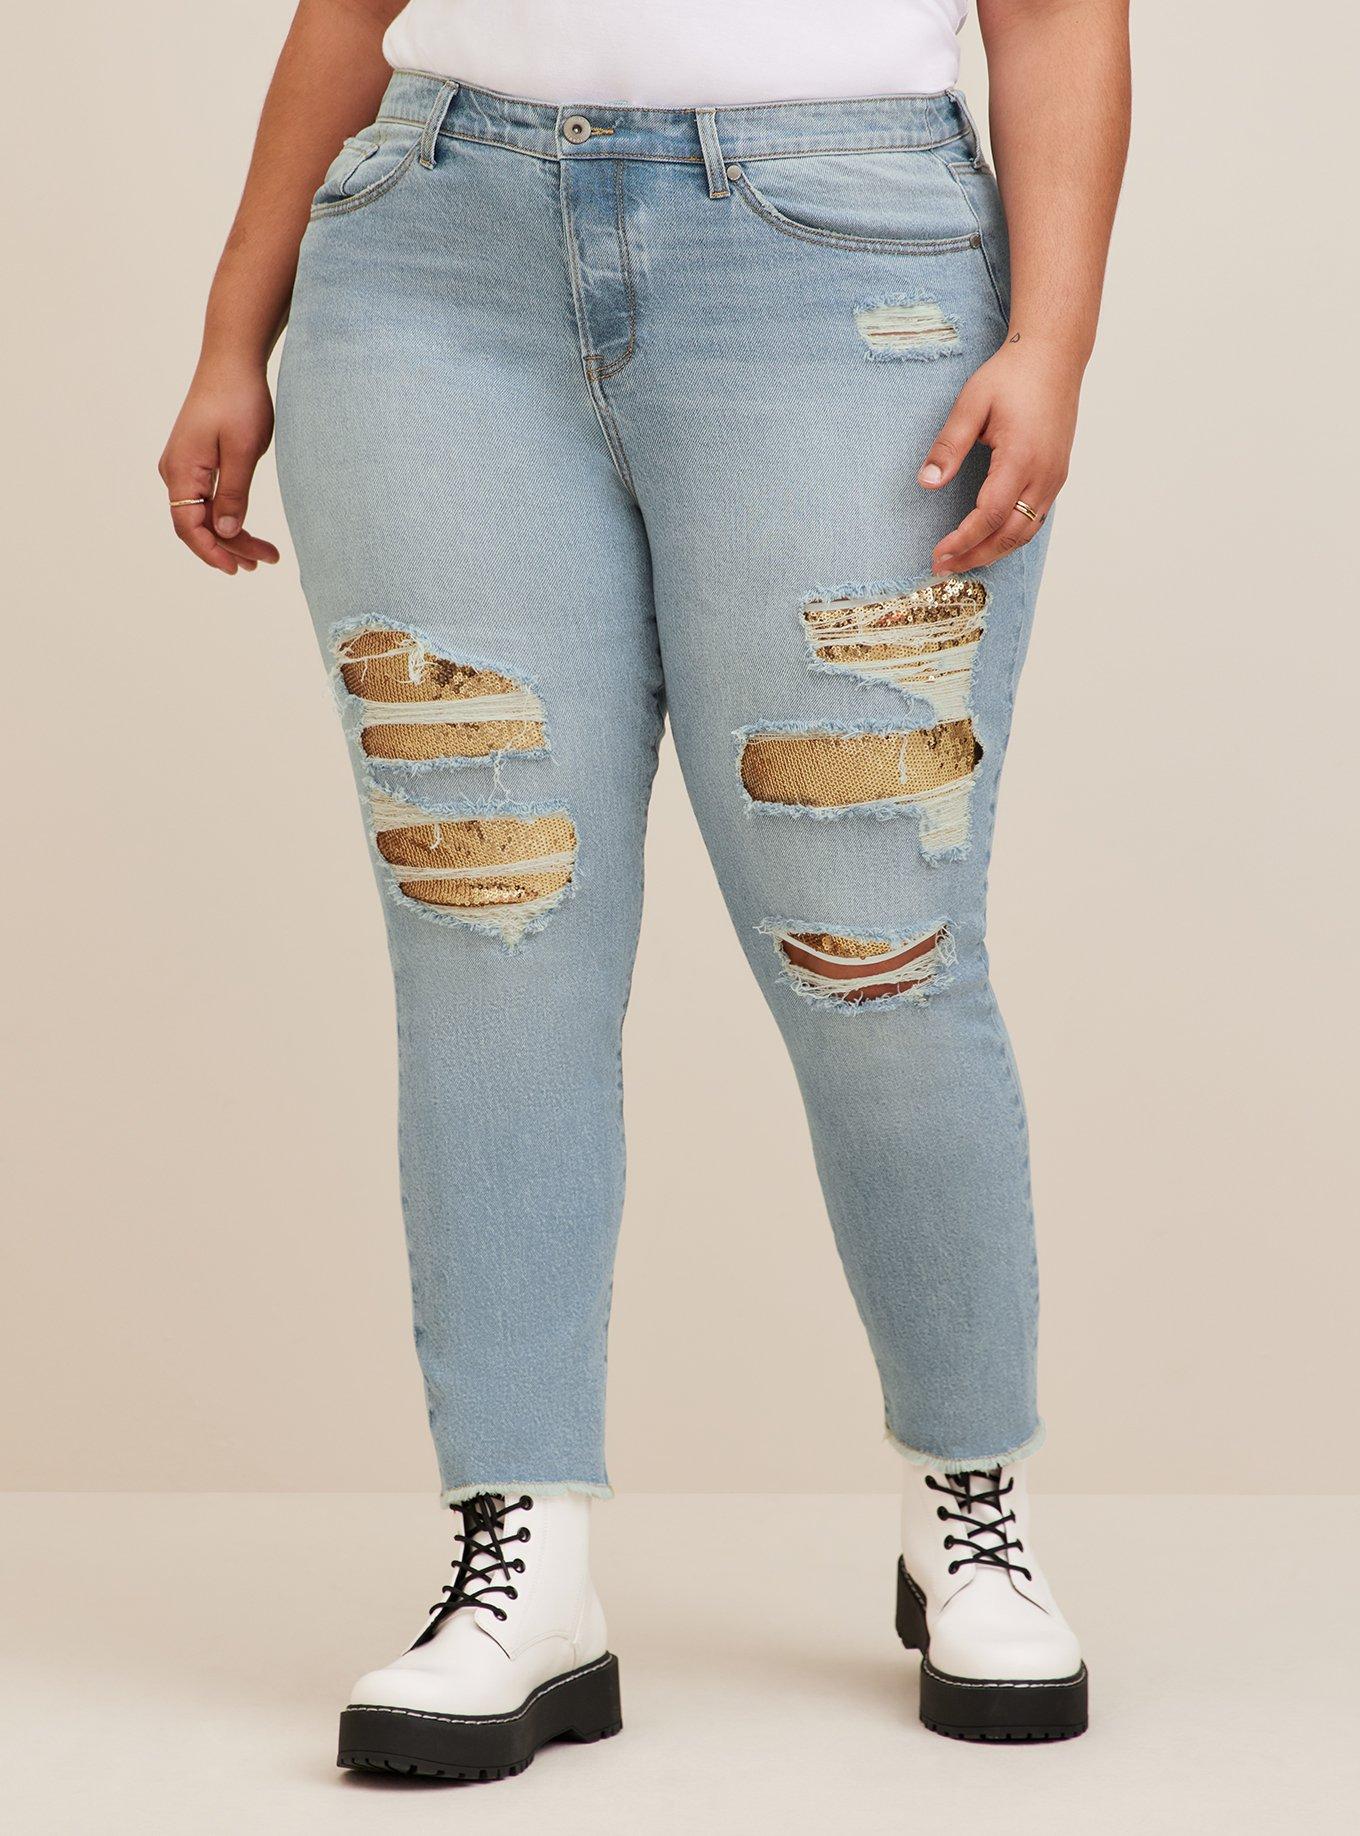 LW Plus Size Mid Waist Stretchy Ripped Jeans